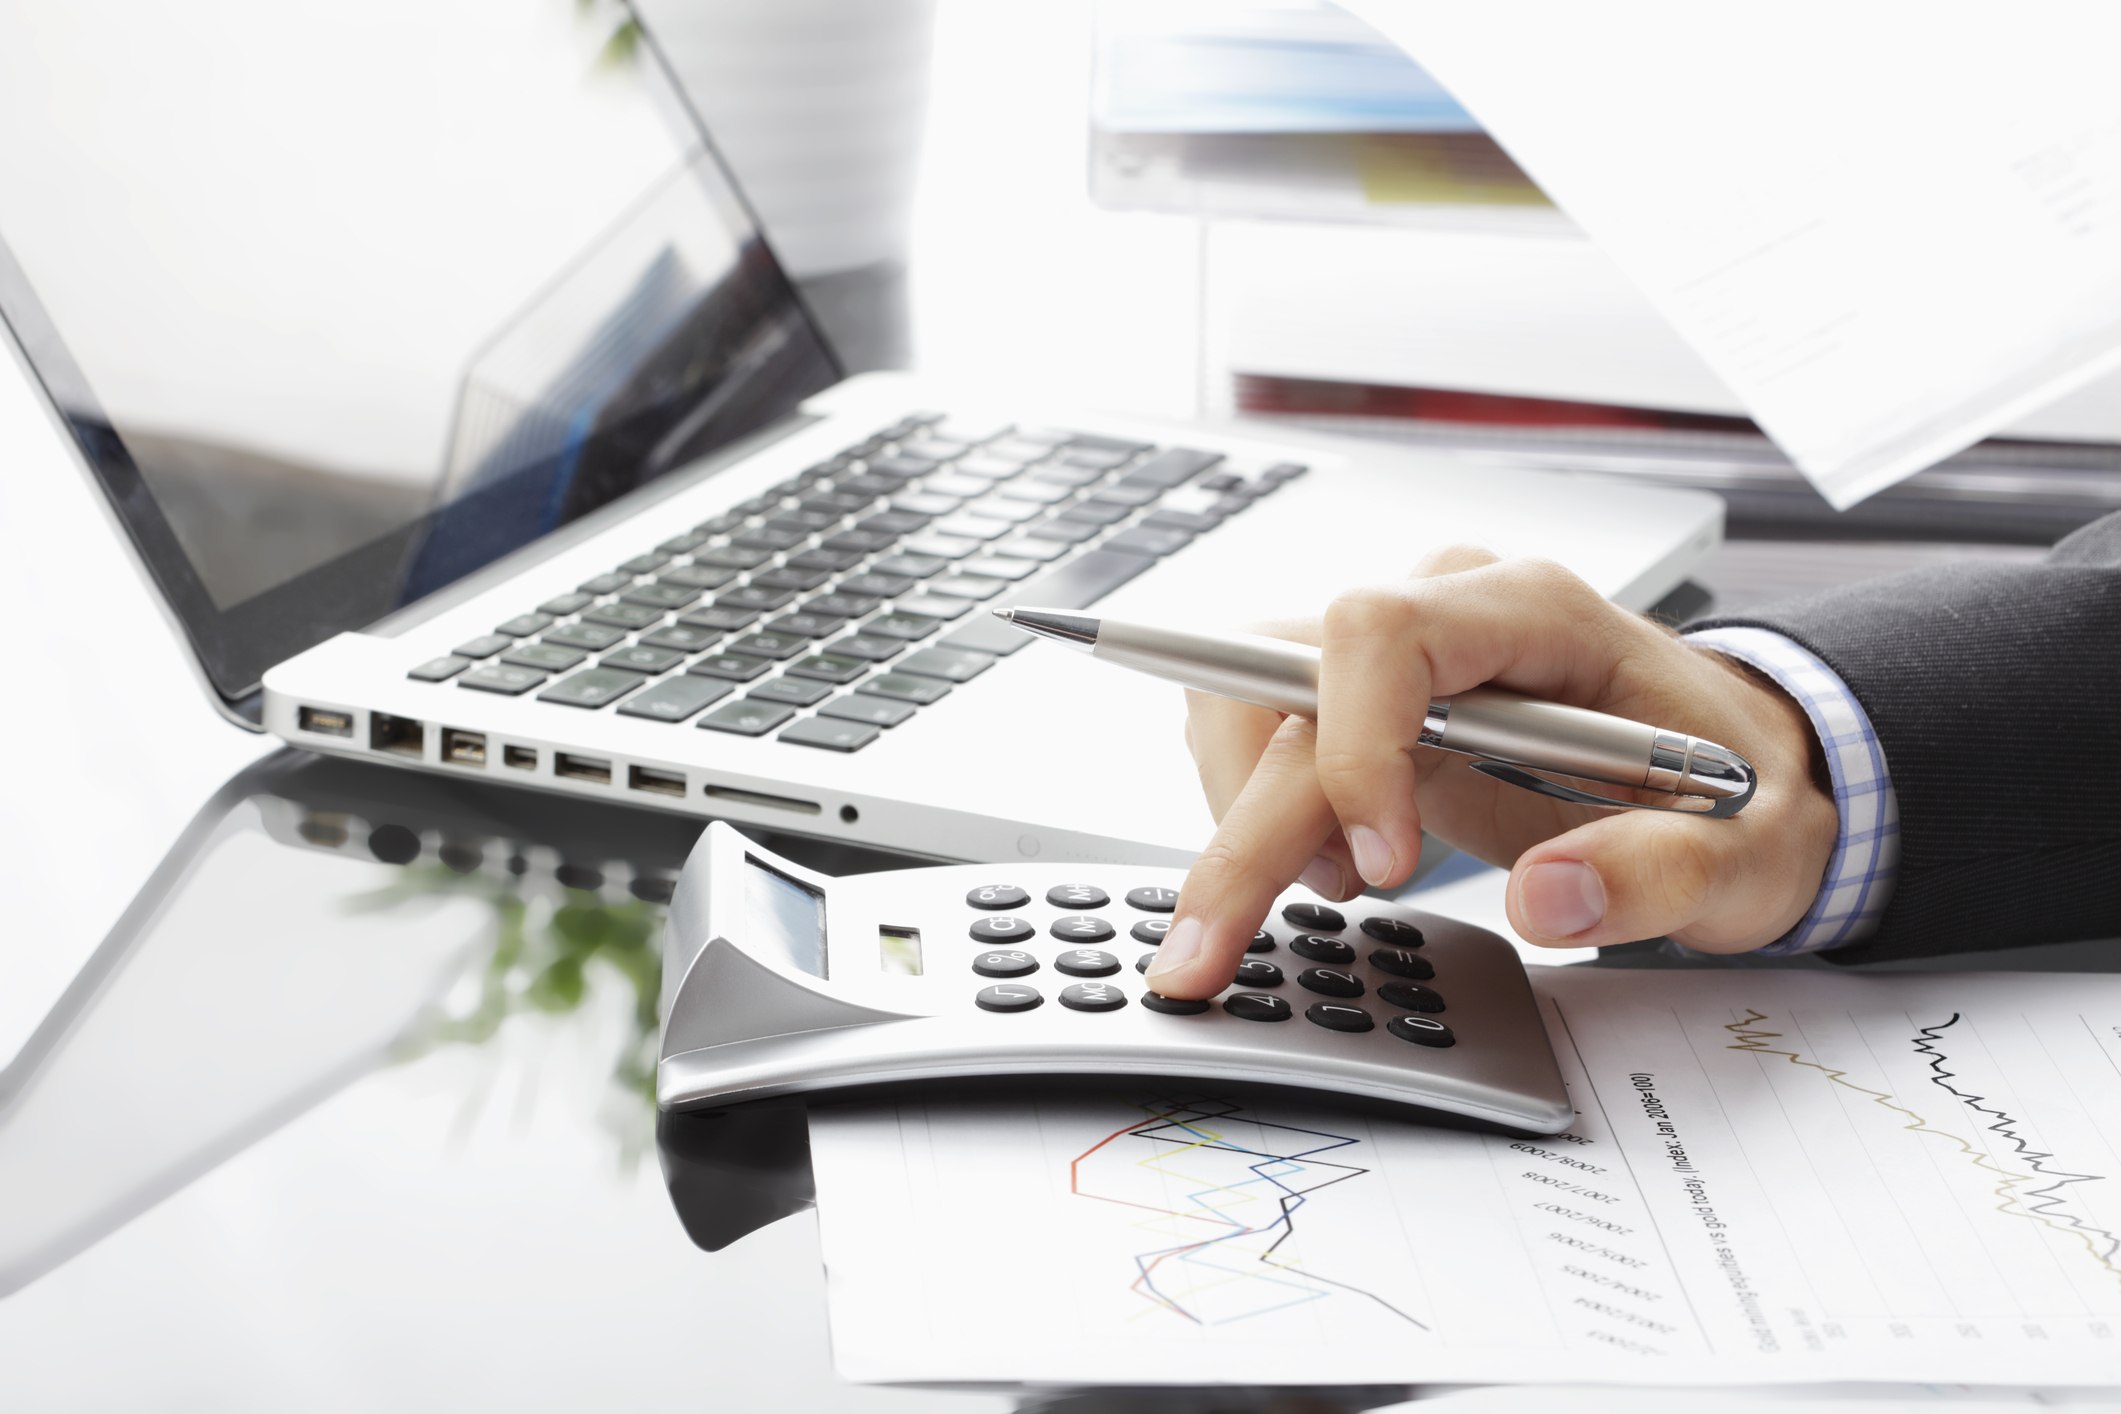 HOW SMEs CAN AVOID THE MOST COMMON ACCOUNTING MISTAKES